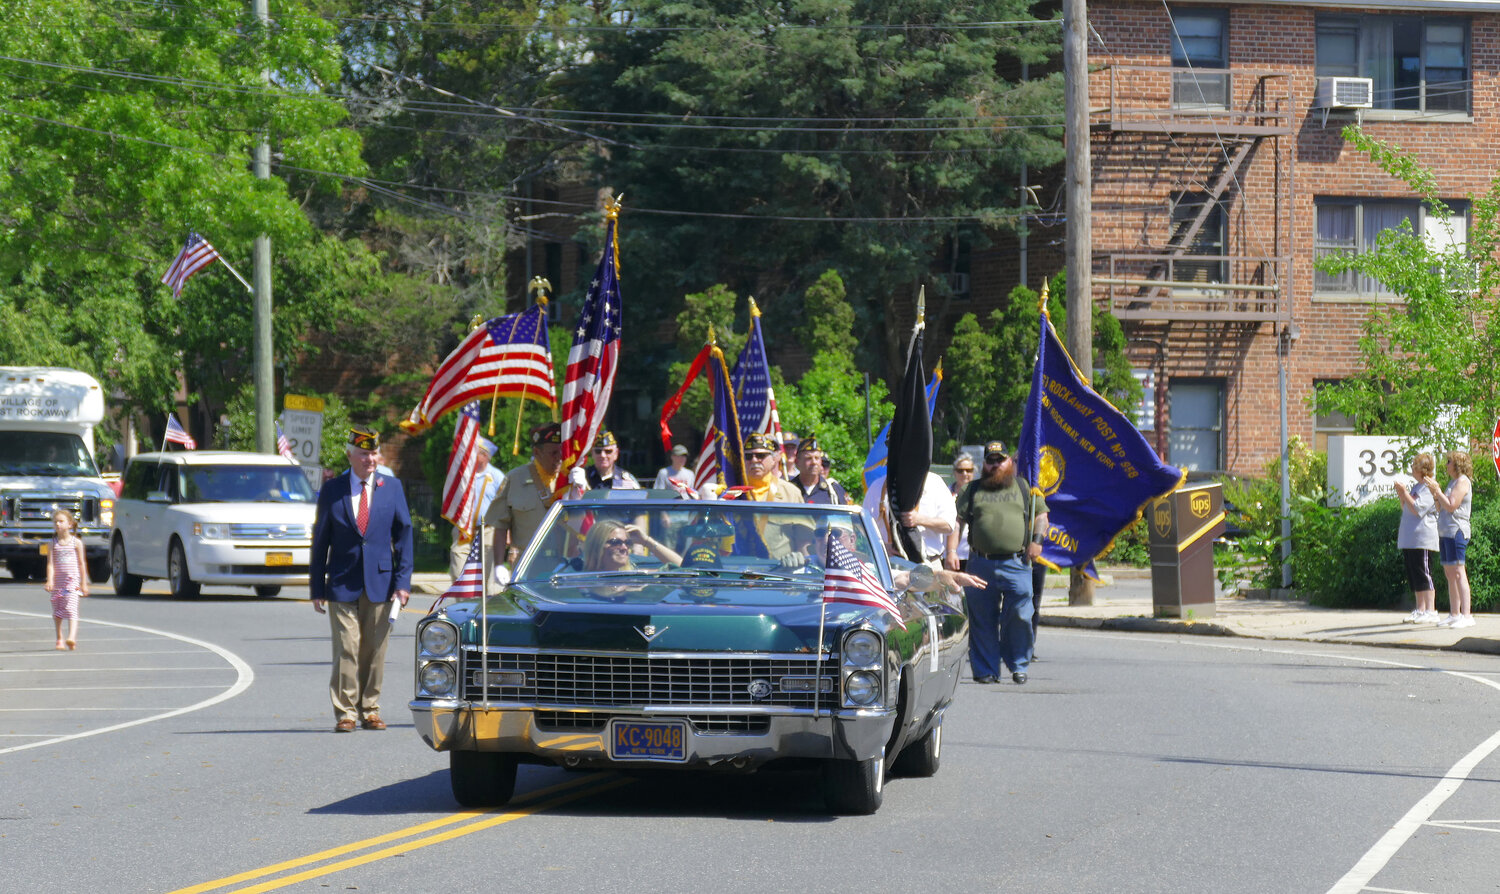 VFW Post 958 march in the East Rockaway Memorial Day parade last year.